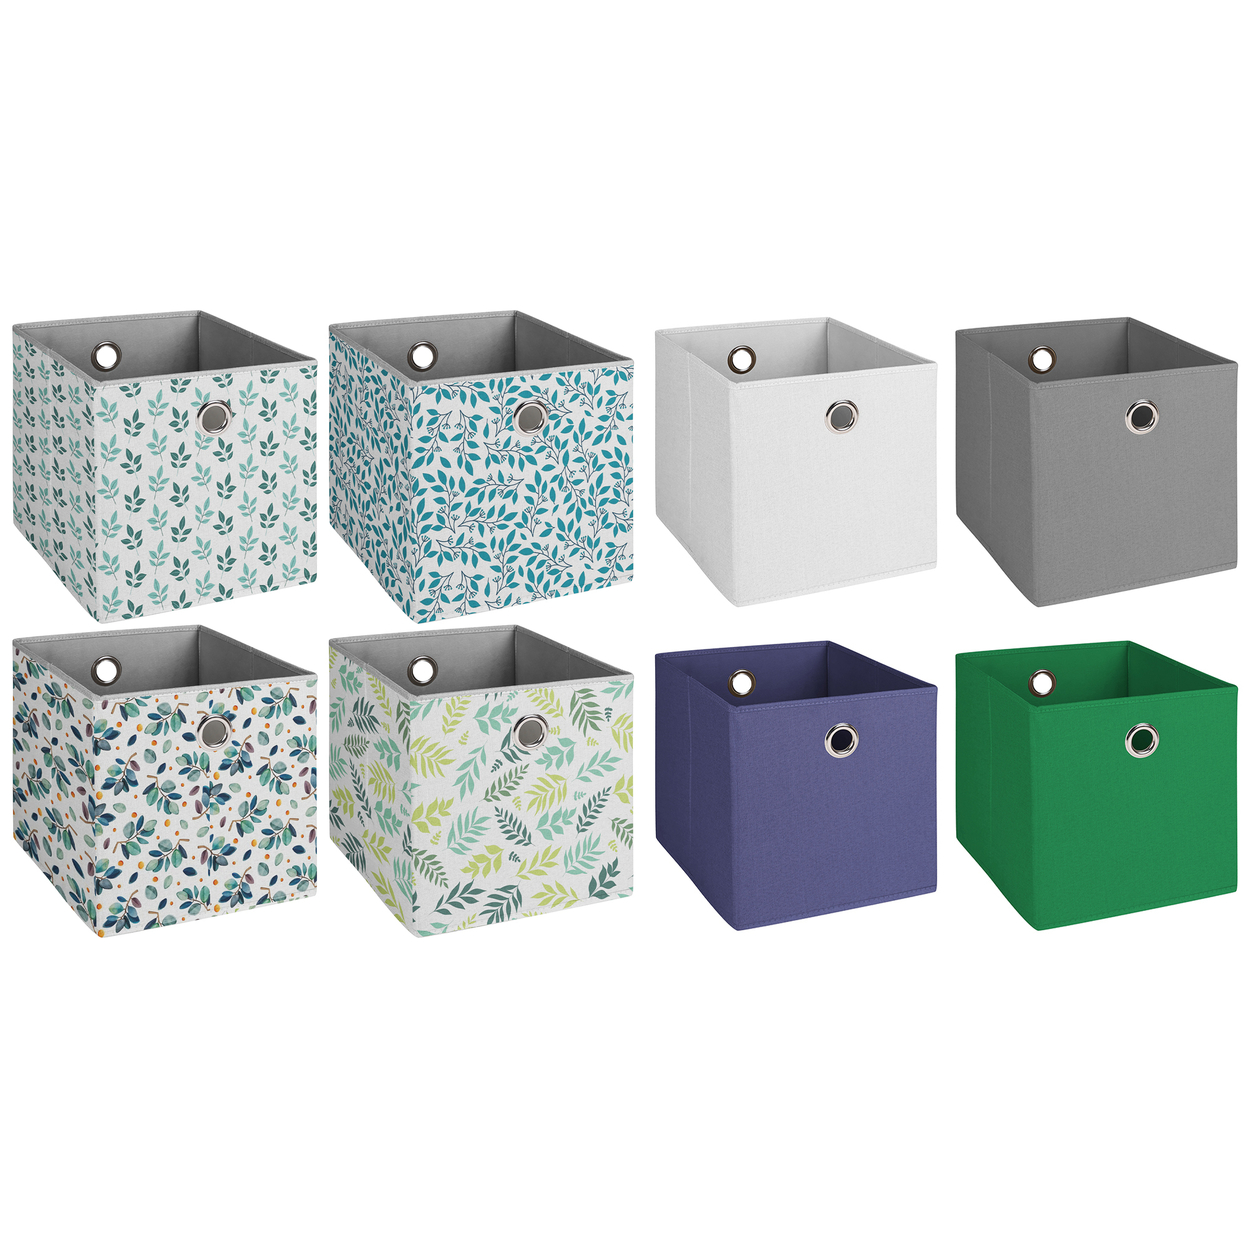 2-Pack: Multipurpose Stackable Basic Fabric Collapsible Storage Bin Cube Organizer - Solid